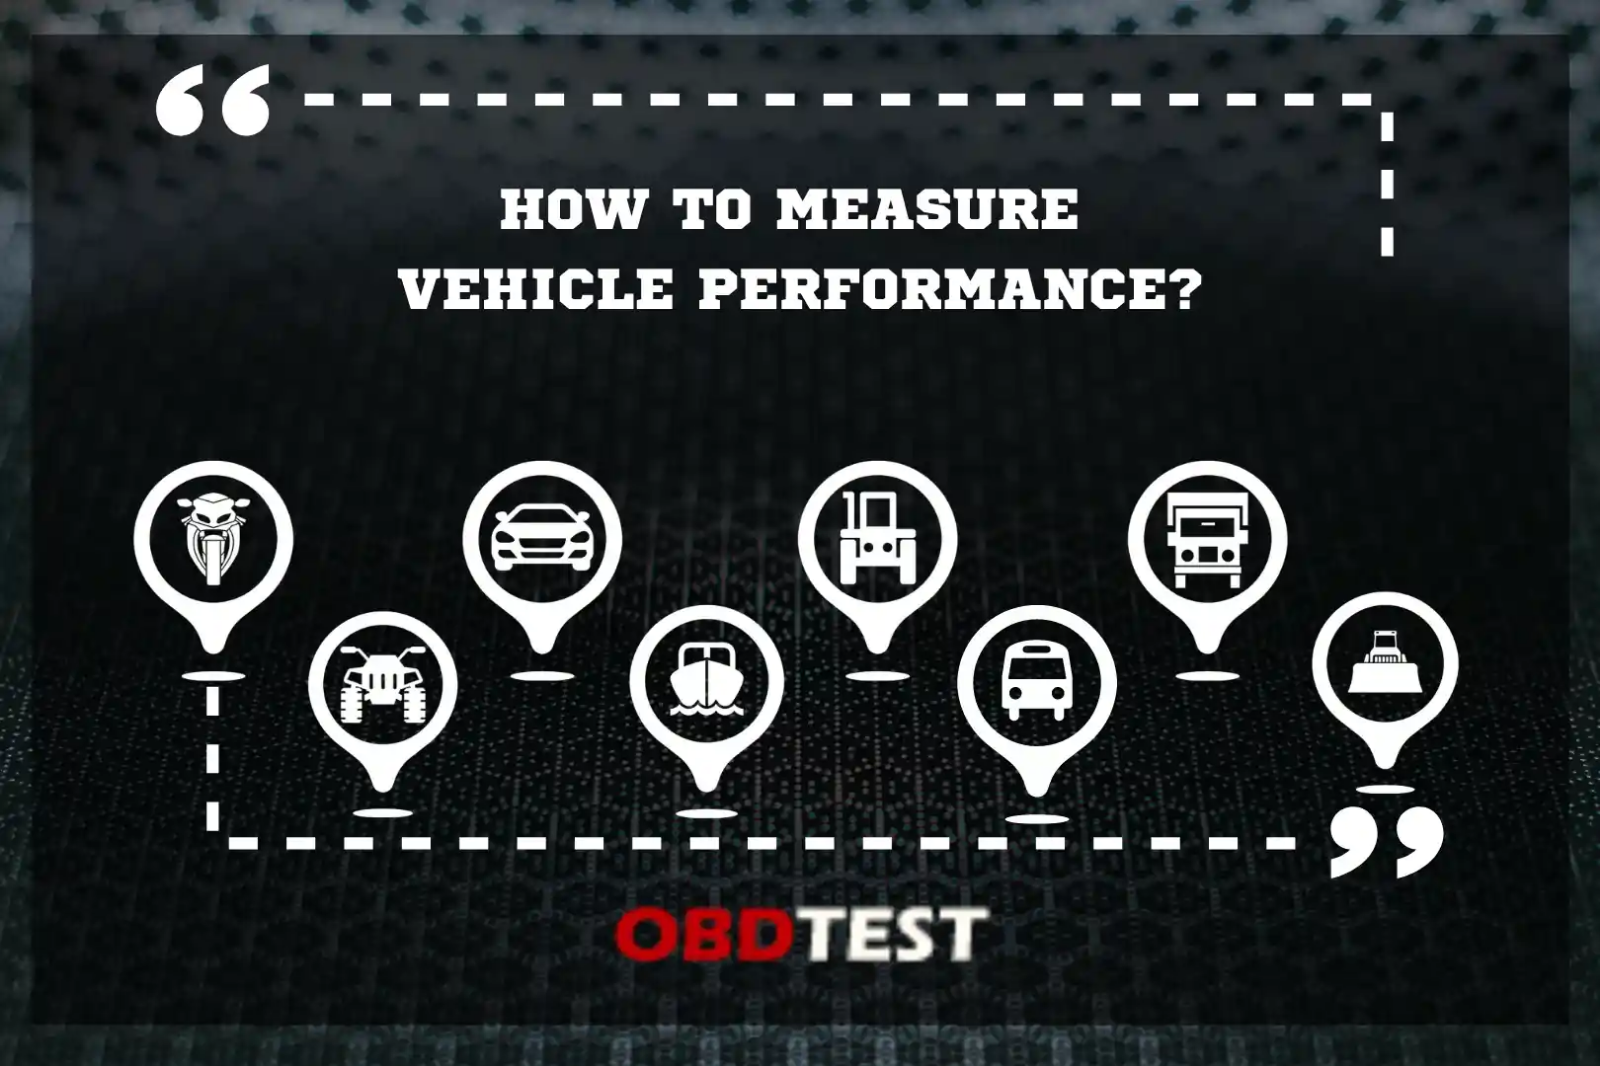 How to measure vehicle performance?